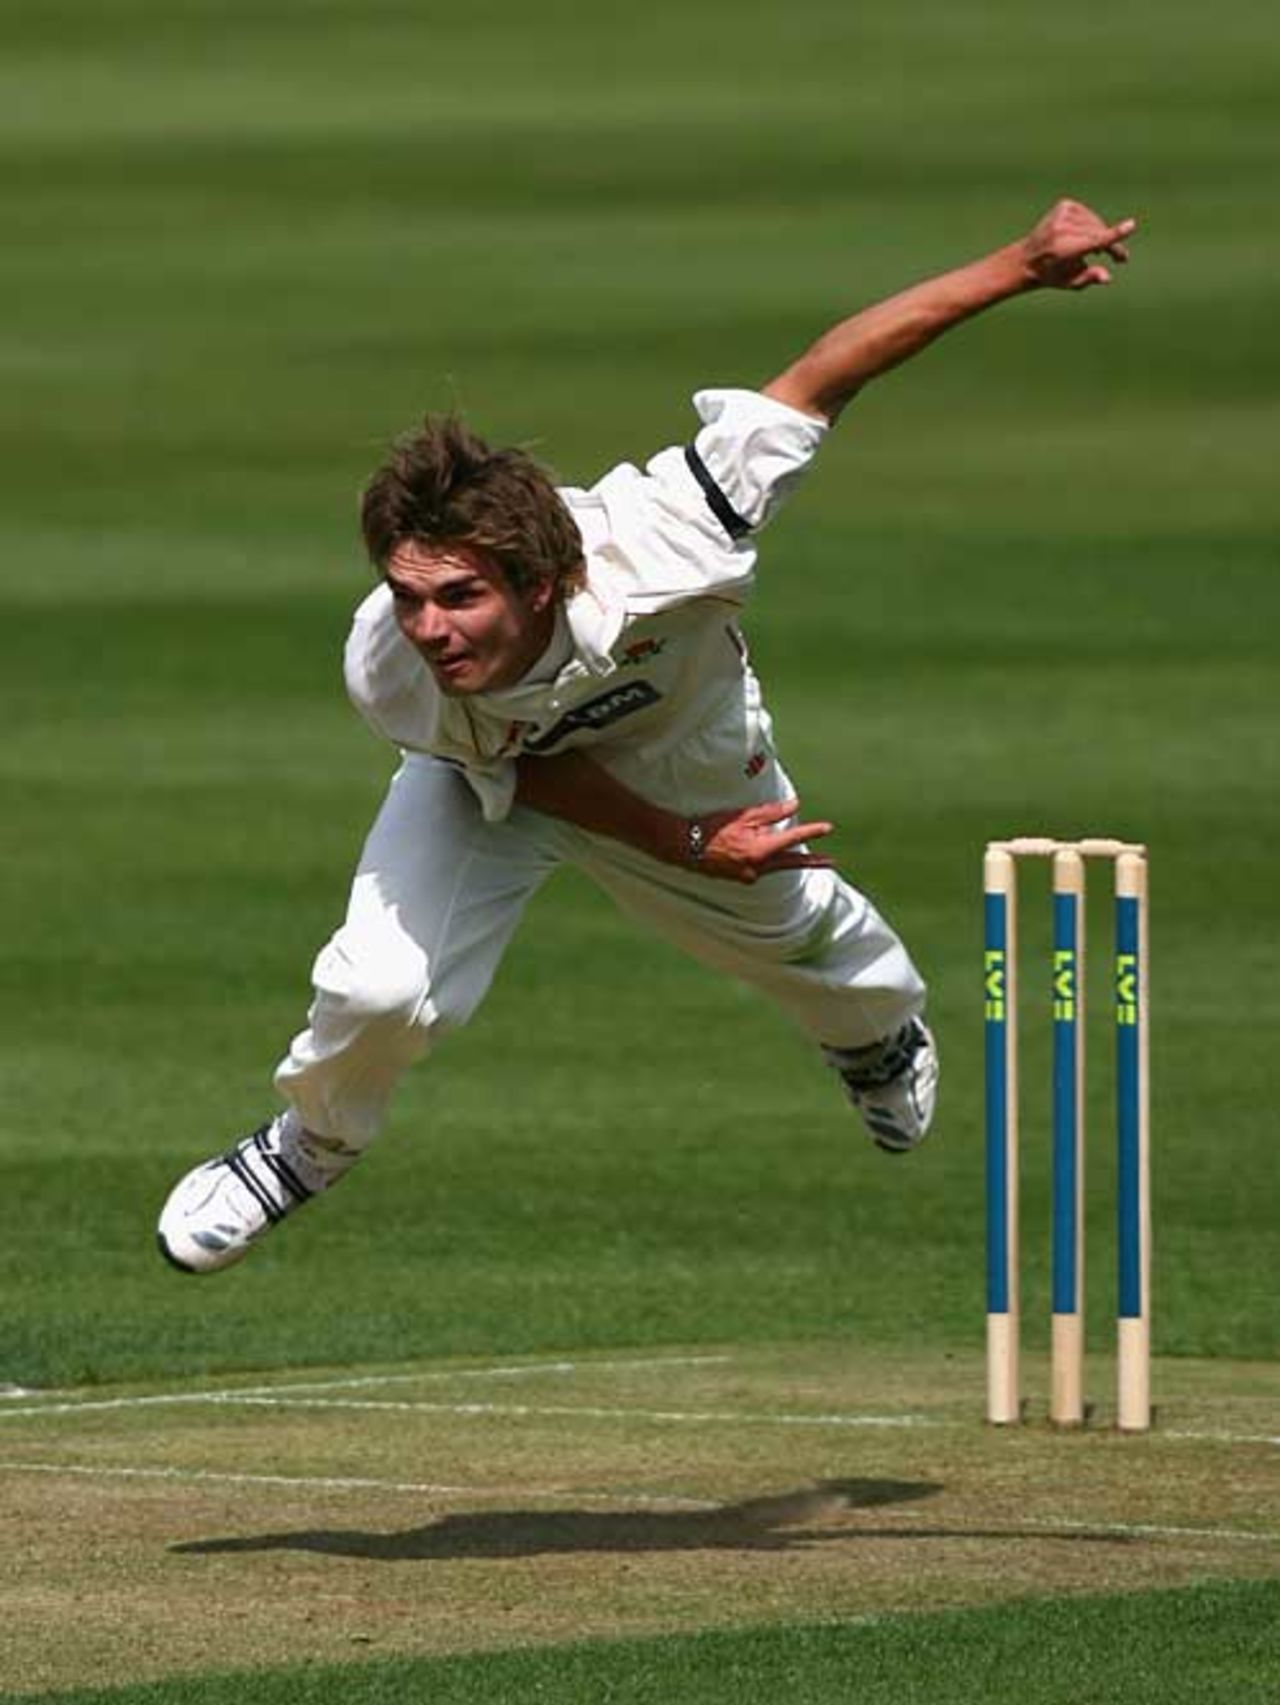 Oliver Newby lets one fly for Lancashire, Warwickshire v Lancashire, County Championship, Division One, Edgbaston, April 18, 2007